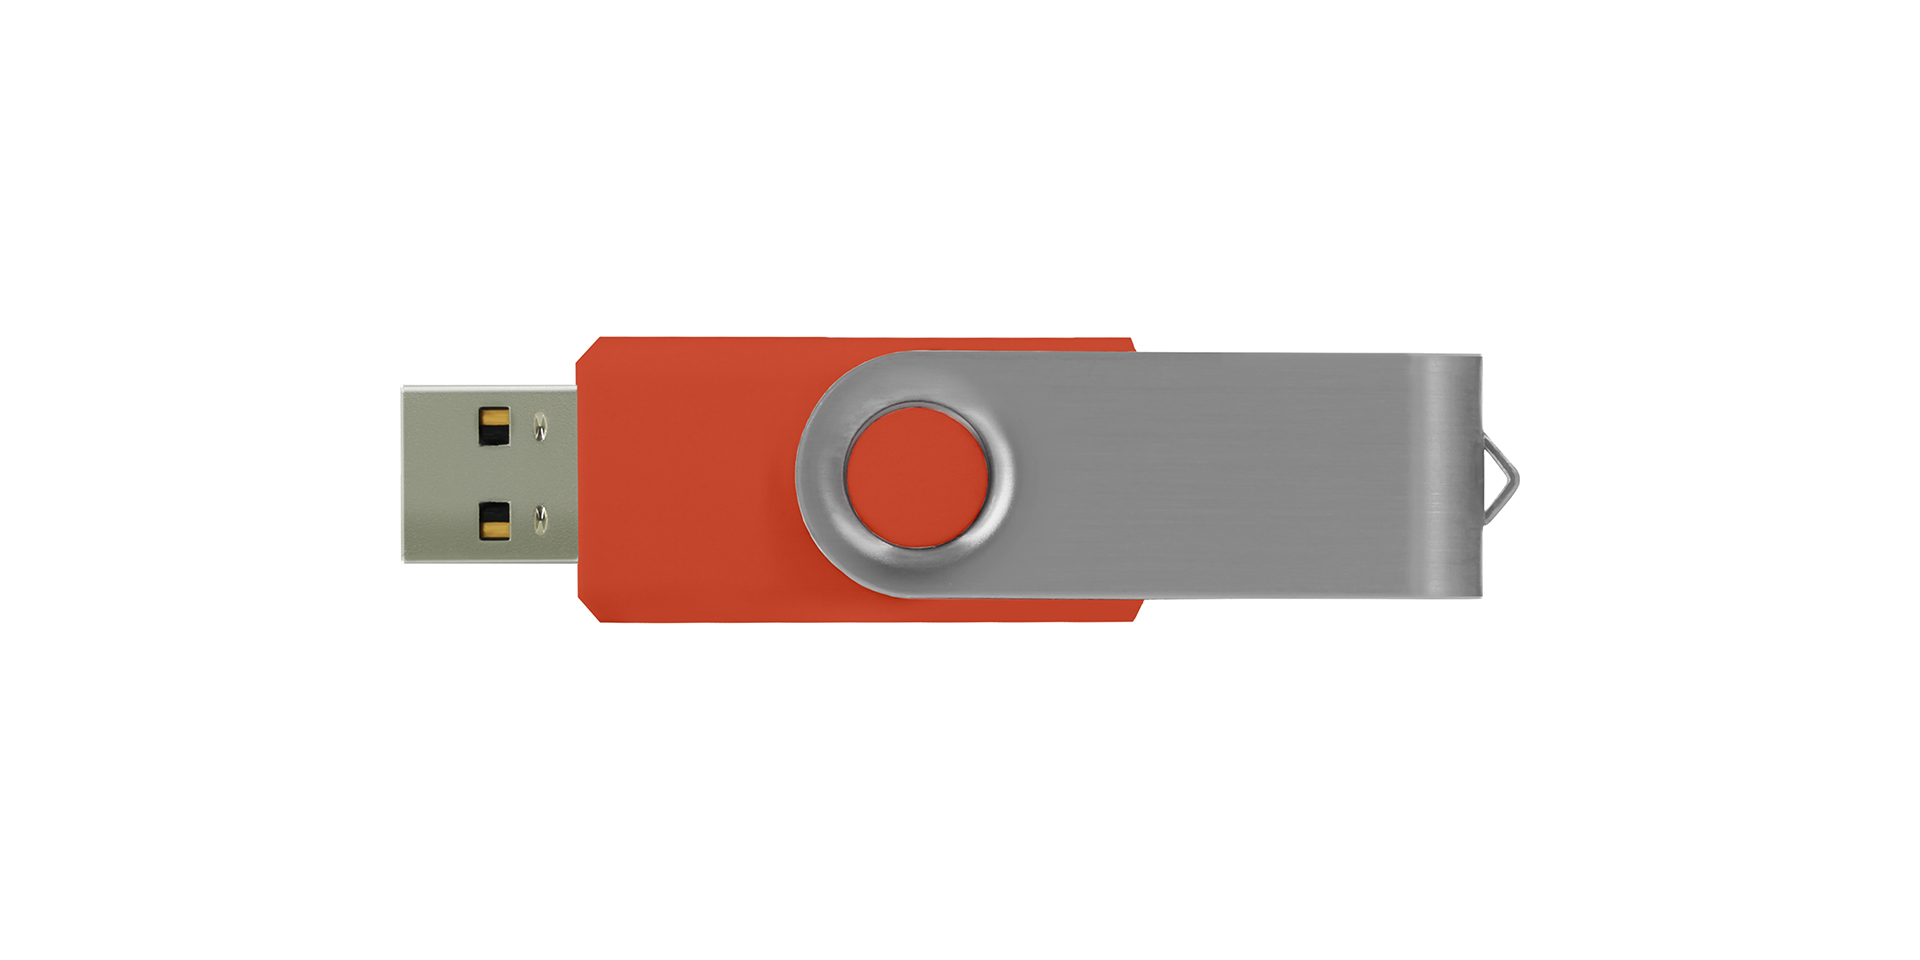 USB as a gift